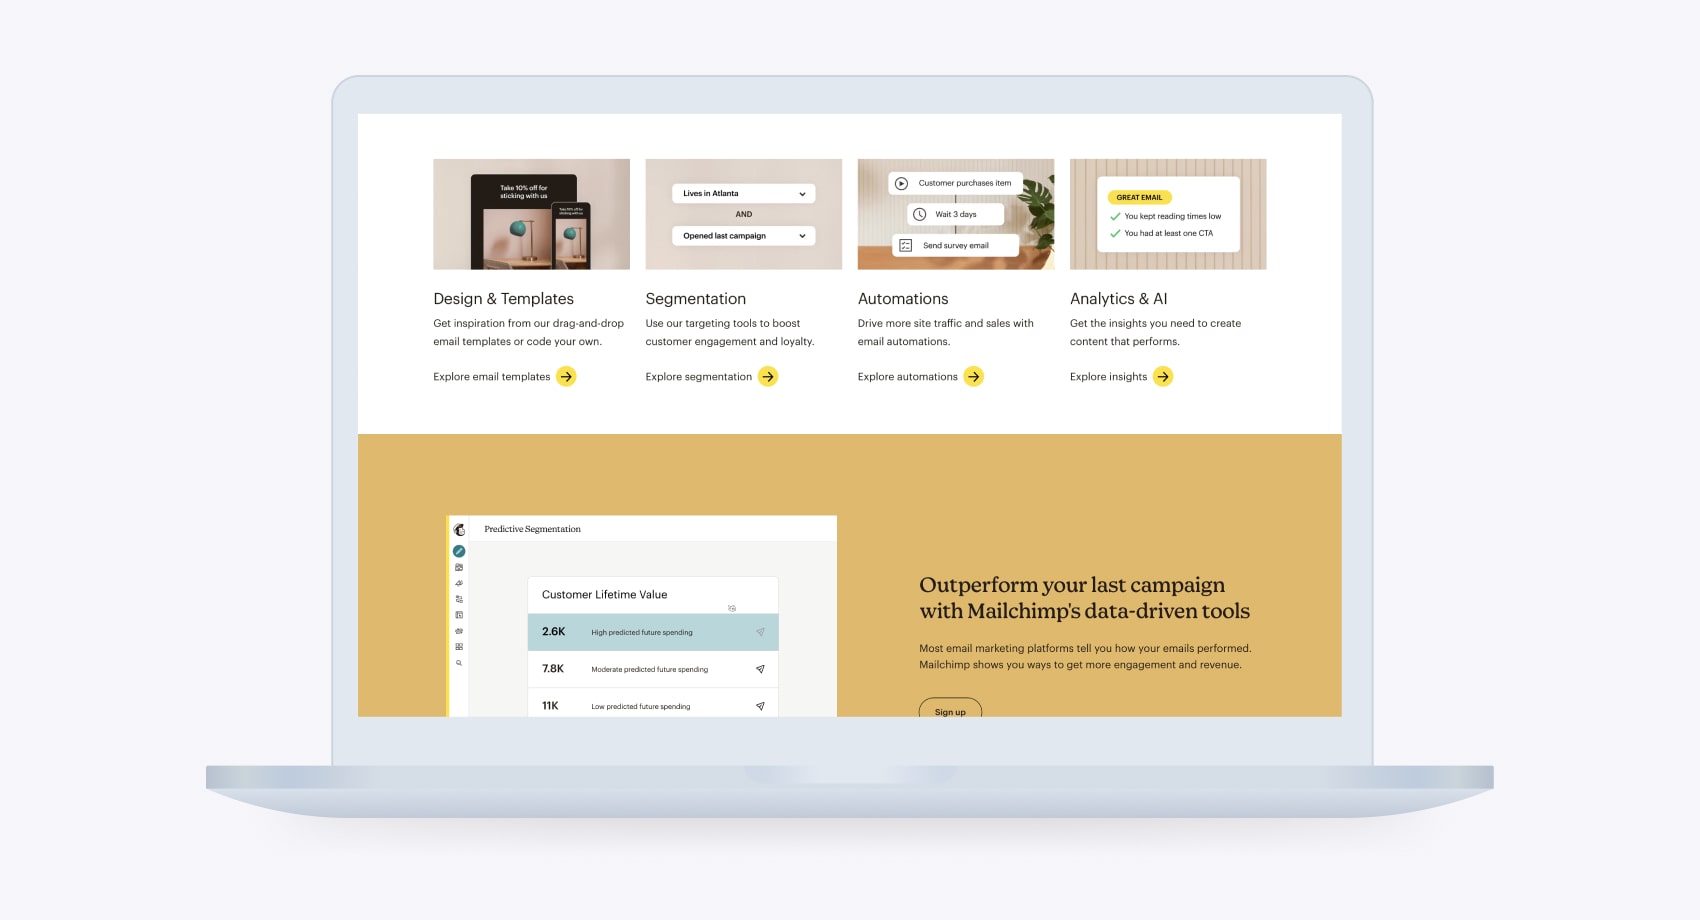 What you can work with with Mailchimp